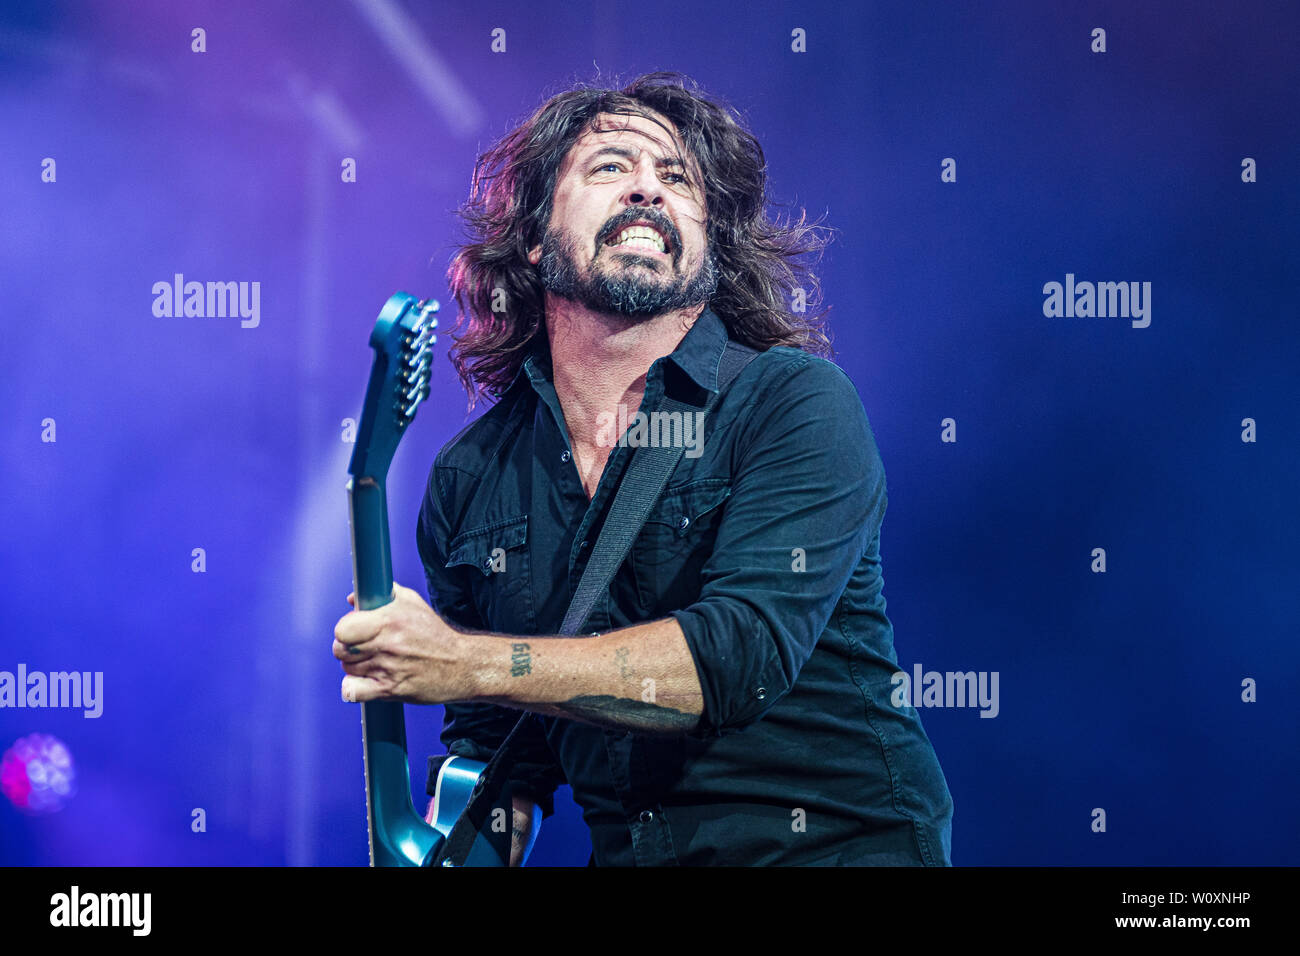 Horsens, Denmark - June 25, 2019. Foo Fighters, the American rock band, performs a live concert at Fængslet in Horsens. Here singer, songwriter and musician Dave Grohl is seen live on stage. (Photo credit: Gonzales Photo - Peter Troest). Stock Photo